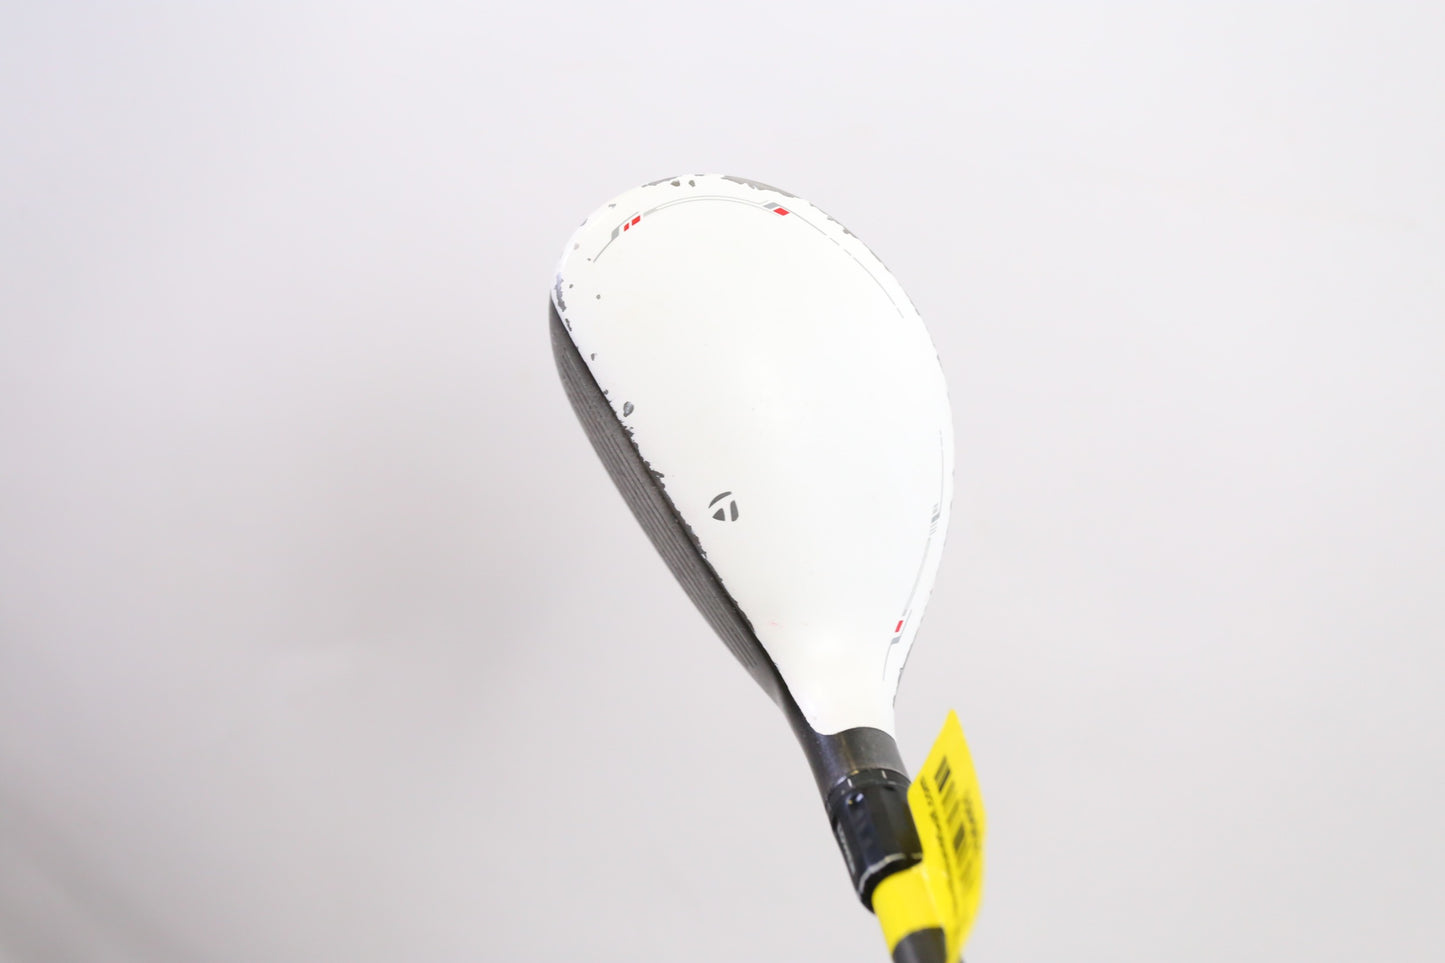 Used TaylorMade Rescue 2009 5H Hybrid - Right-Handed - 23.5 Degrees - Regular Flex